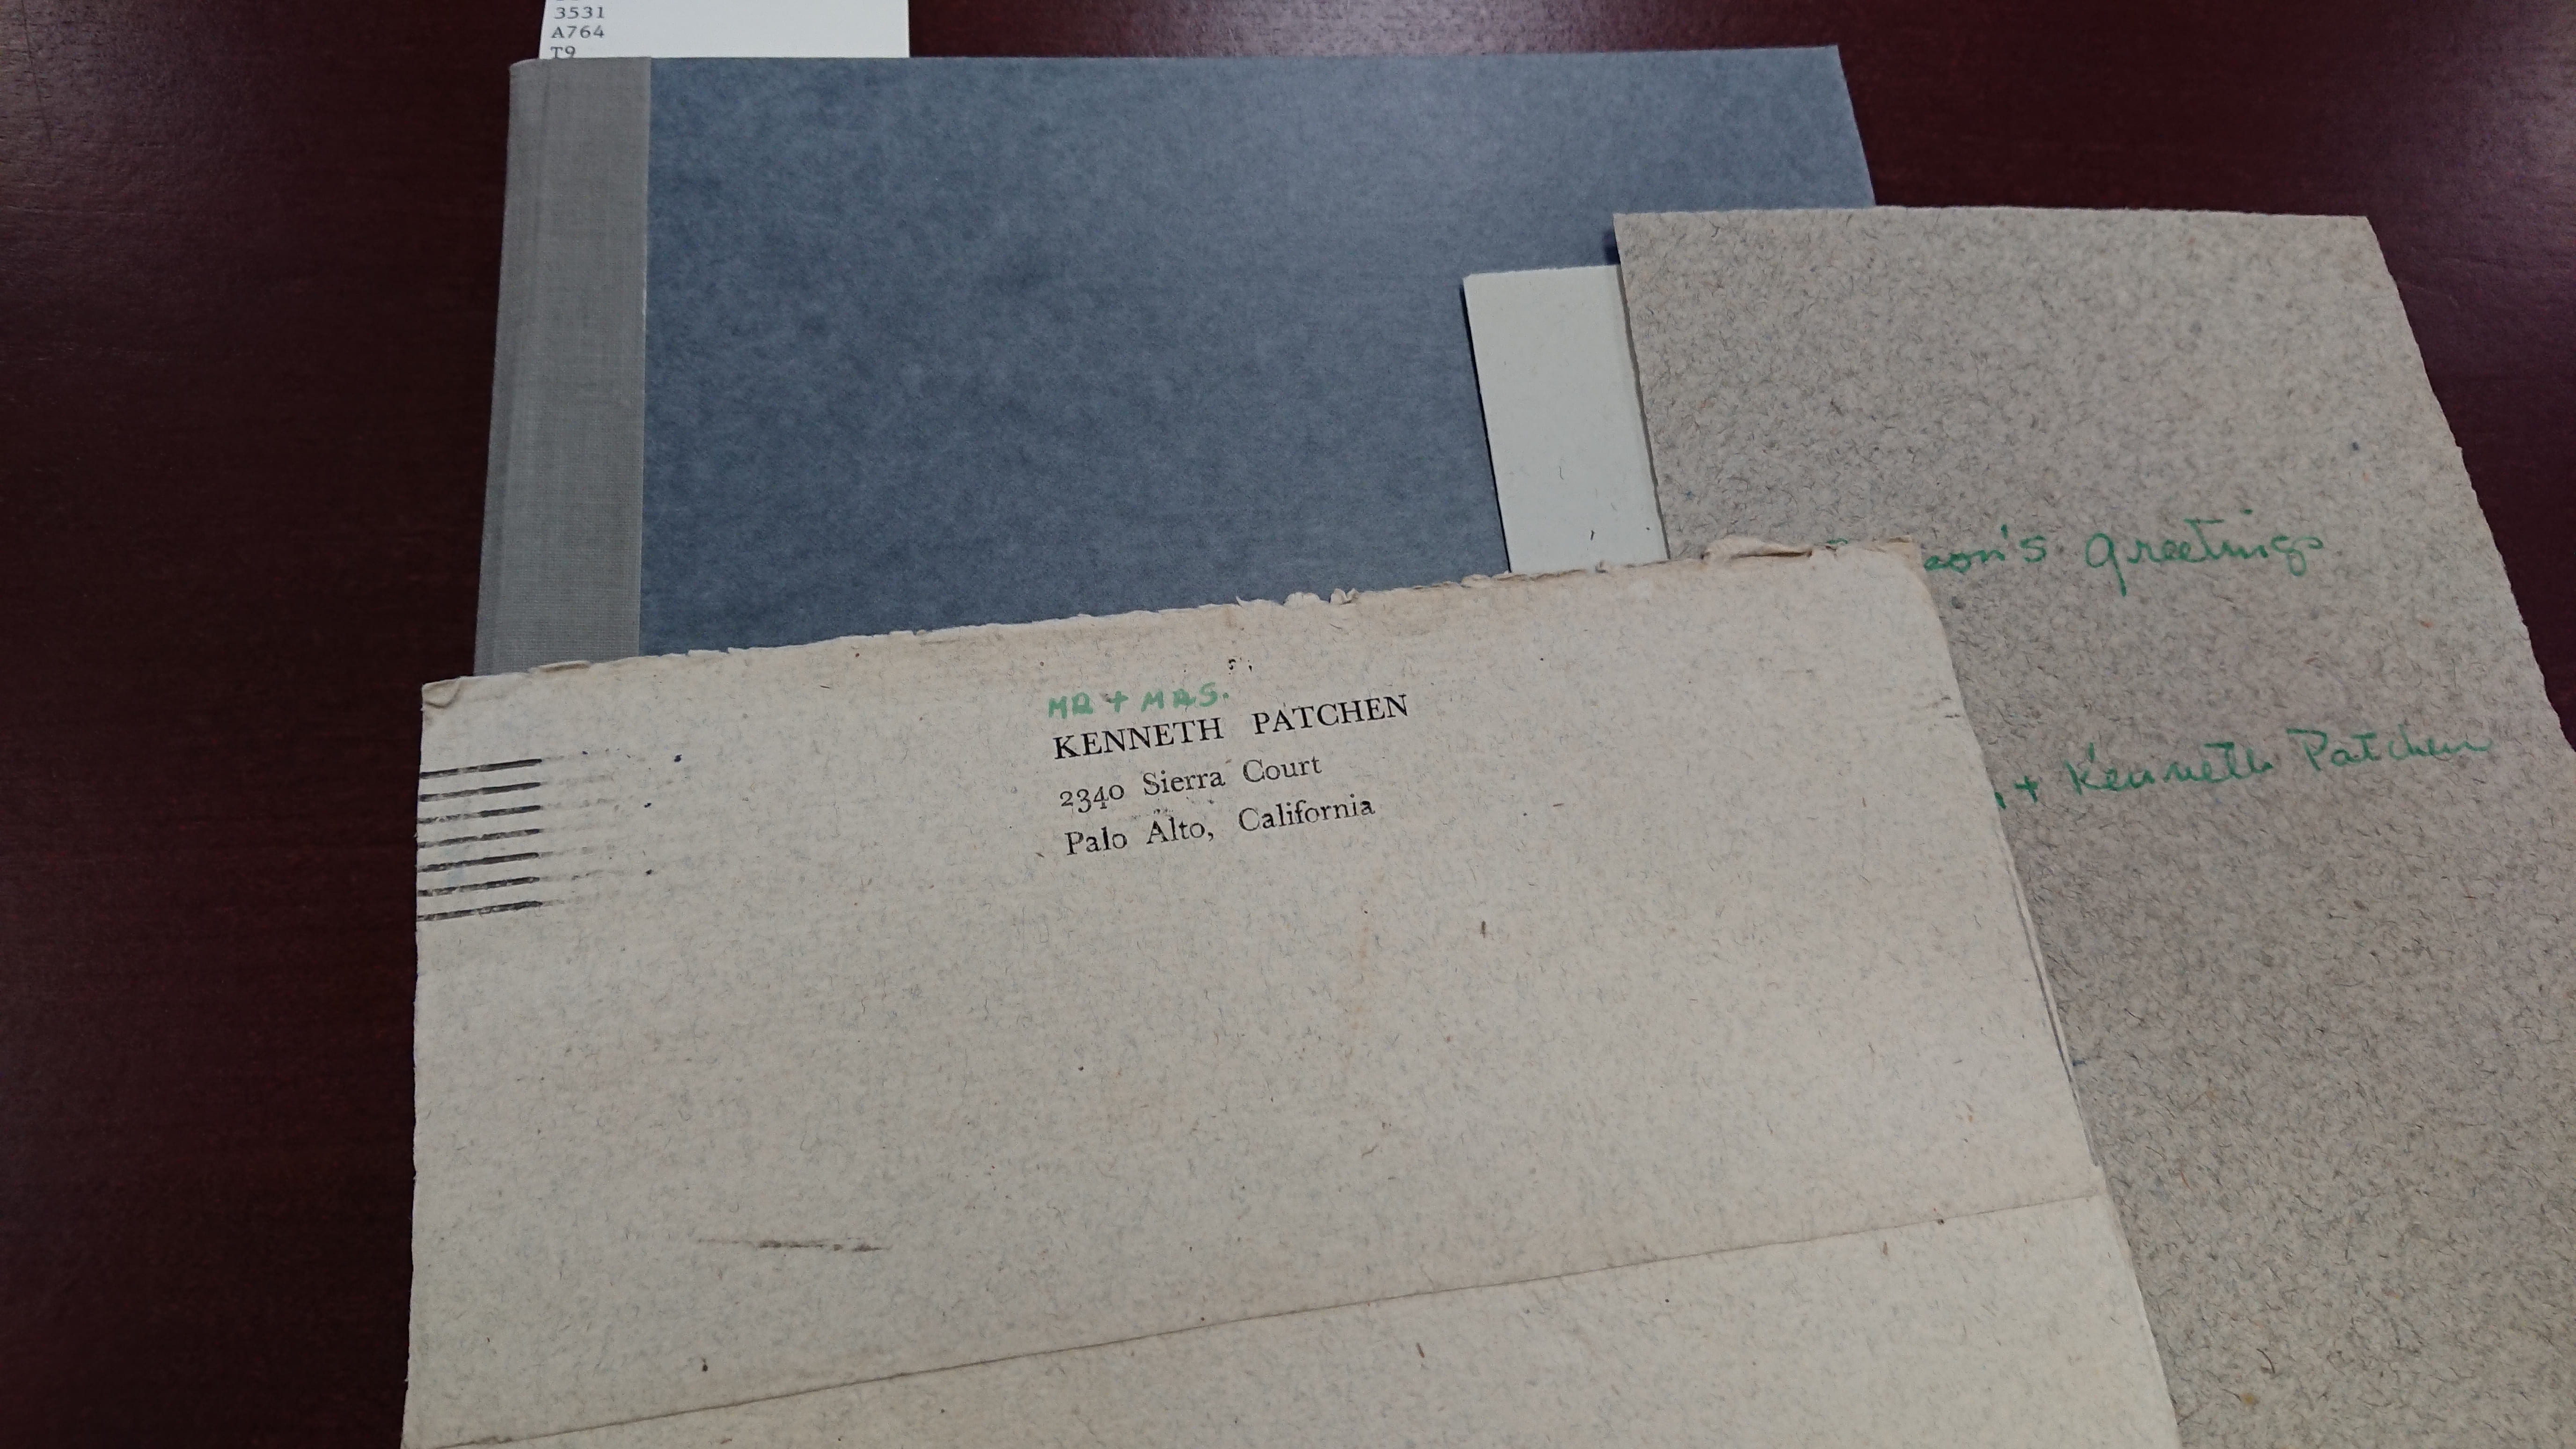 Back of envelope with return address of Kenneth Patchen with Mr. and Mrs. handwritten above